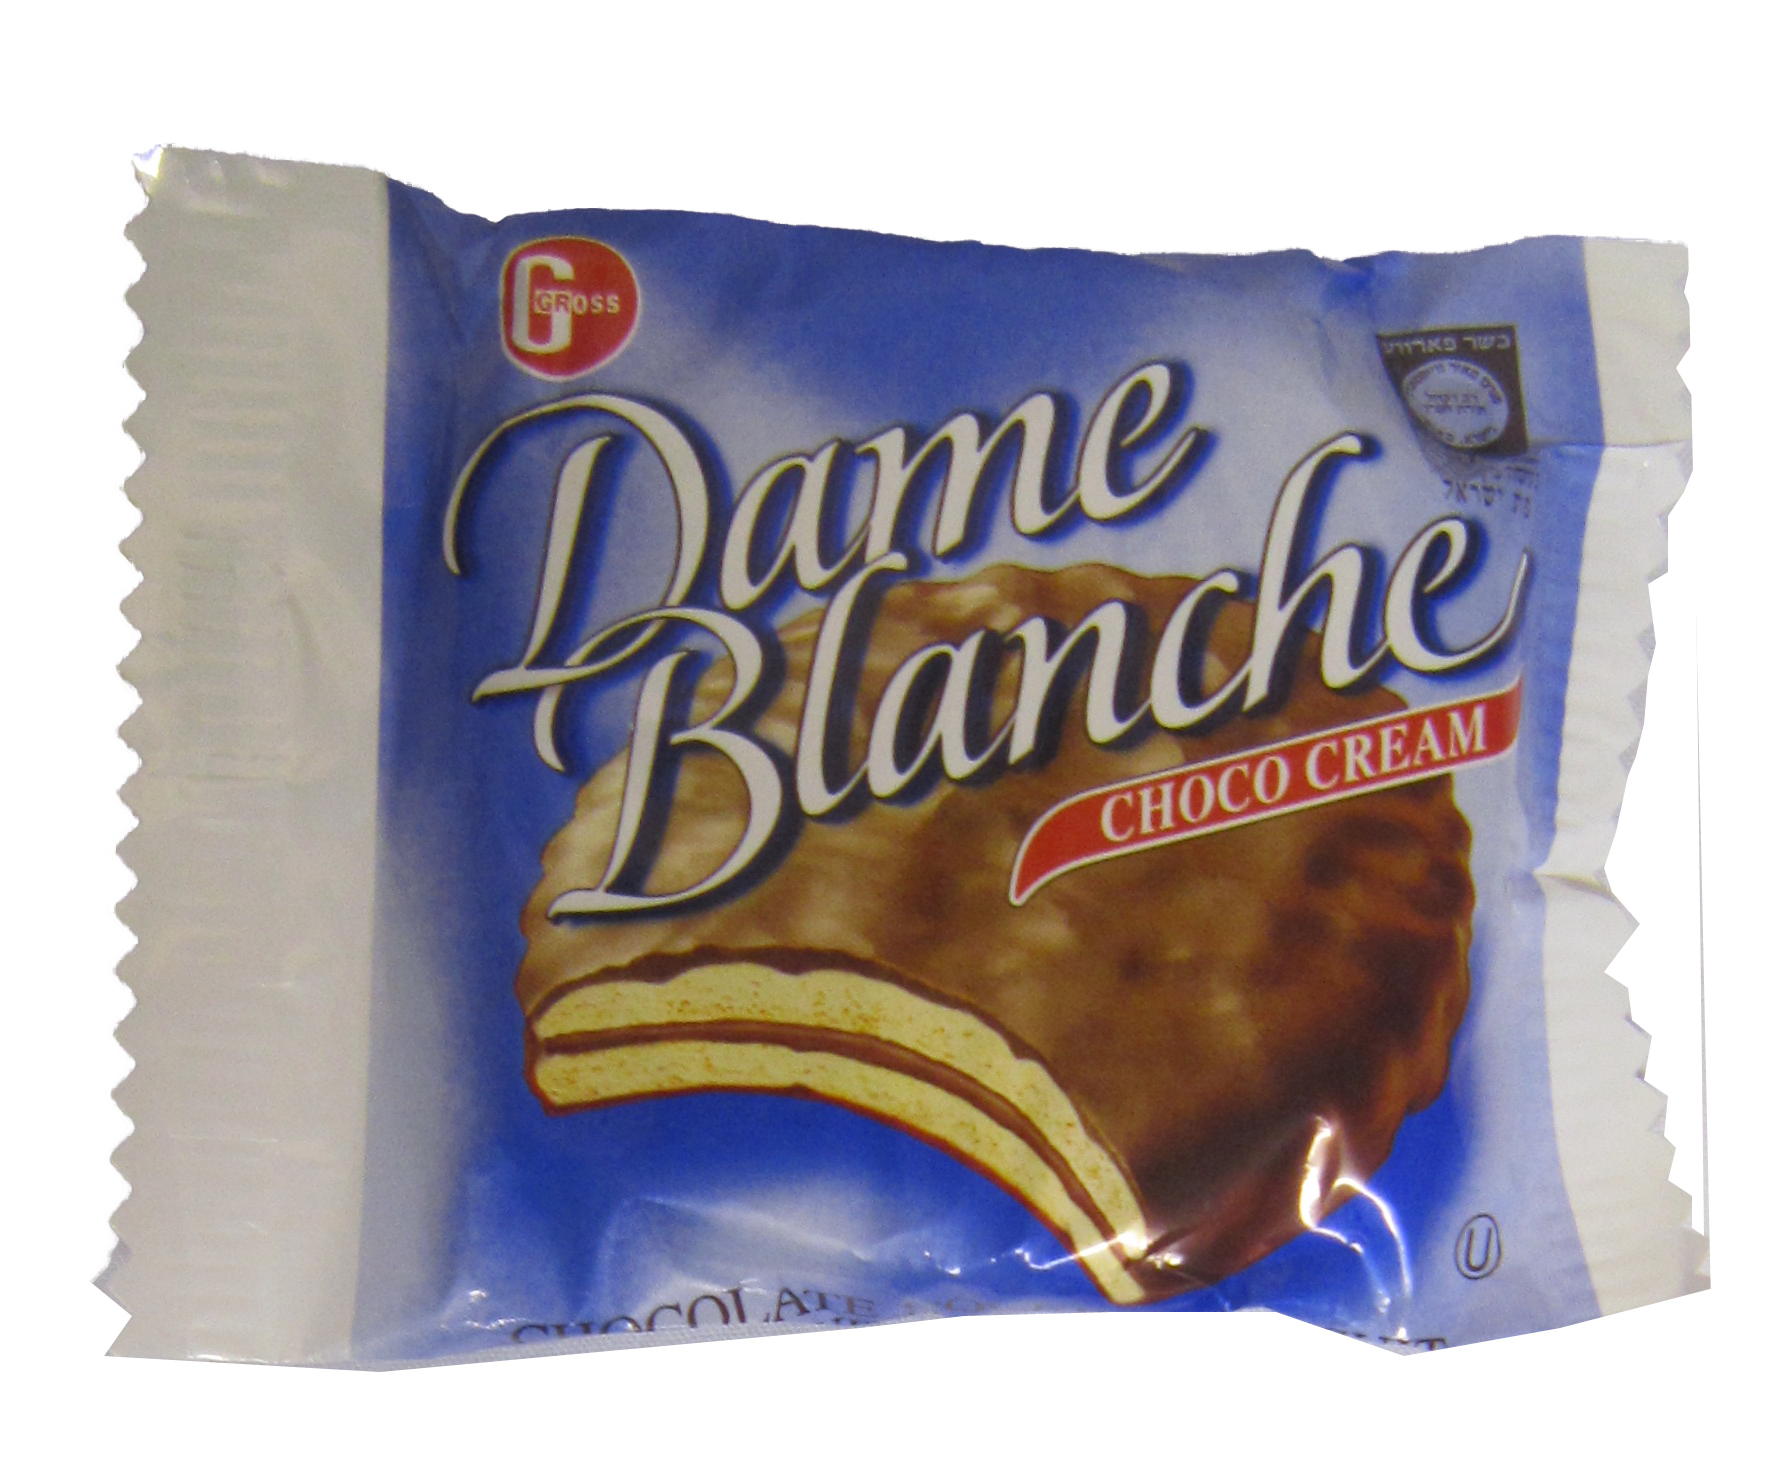 GROSS INDIVIDUAL DAME BLANCHE CHOCOLATE